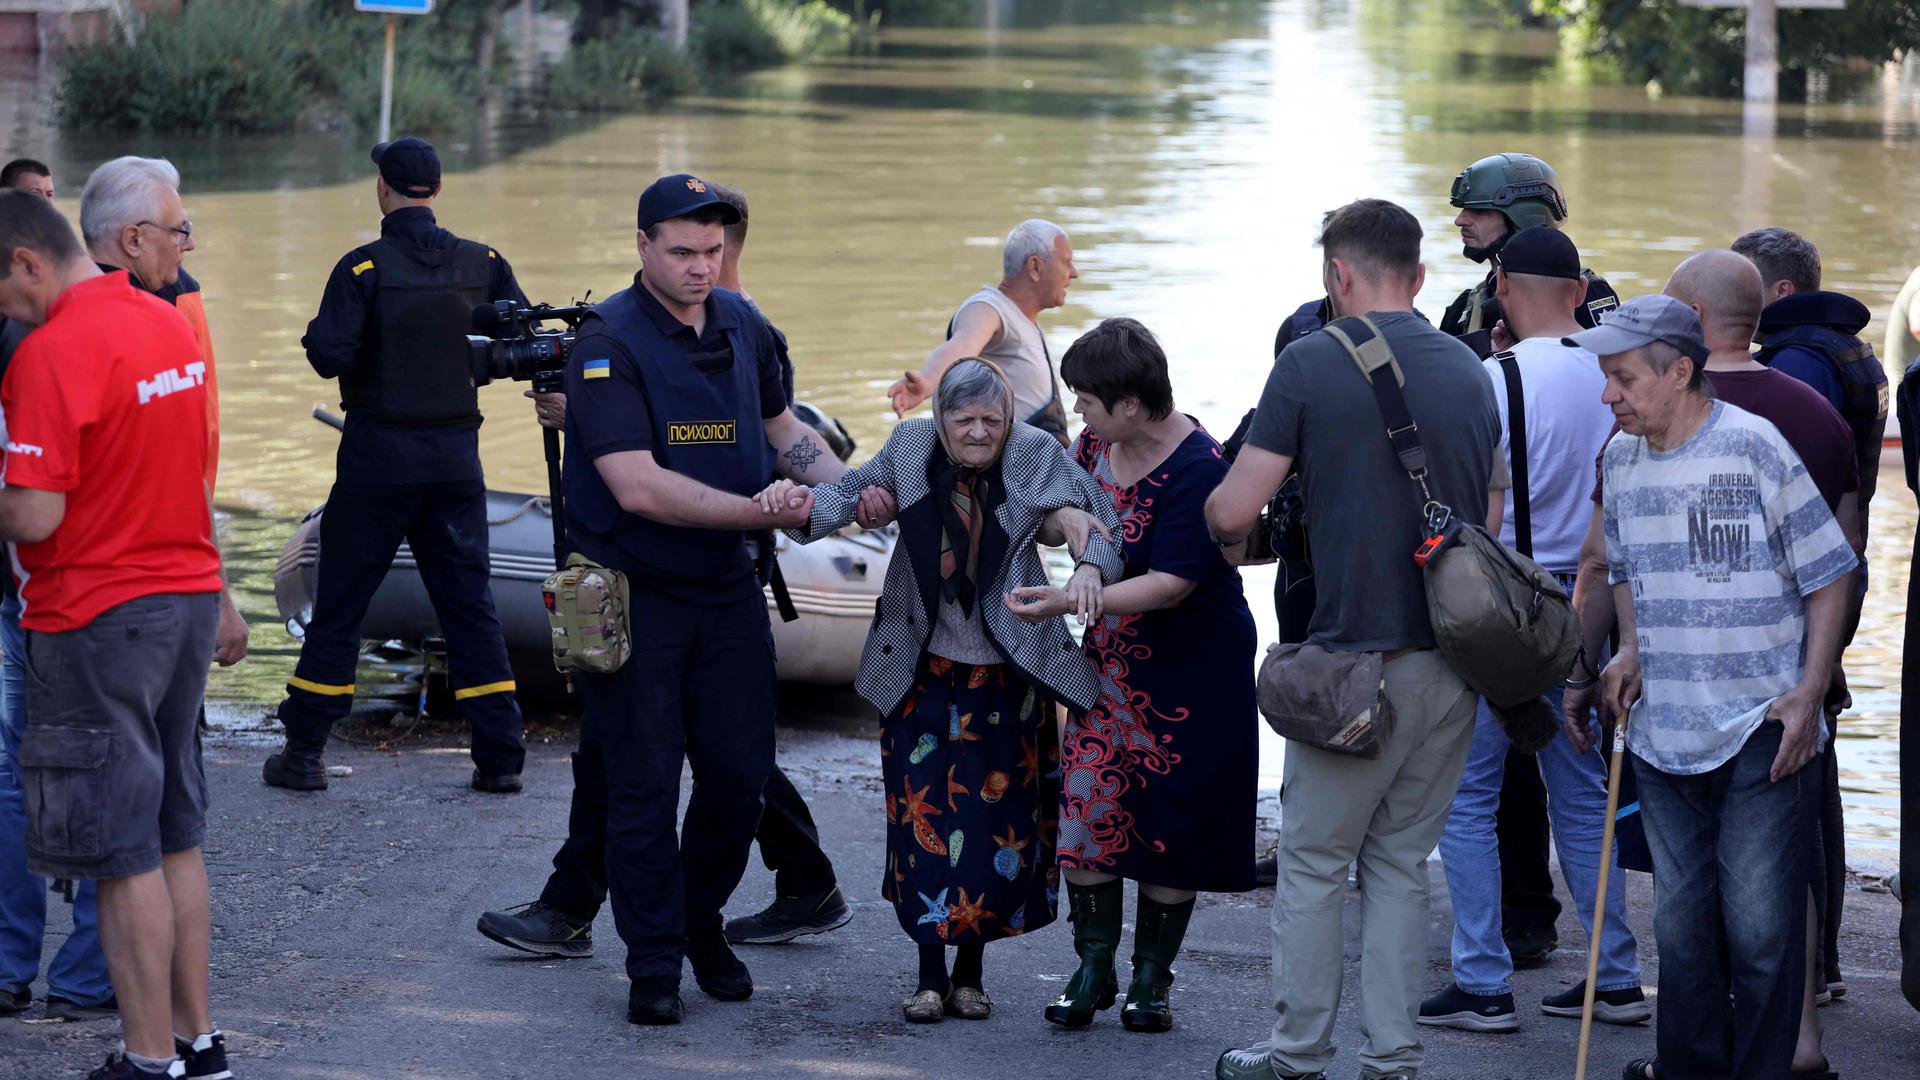 A policeman and a woman help evacuate an elderly local resident from a flooded area in Kherson on Wednesday following widespread flooding caused by damage to the Kakhovka hydroelectric power plant dam. 